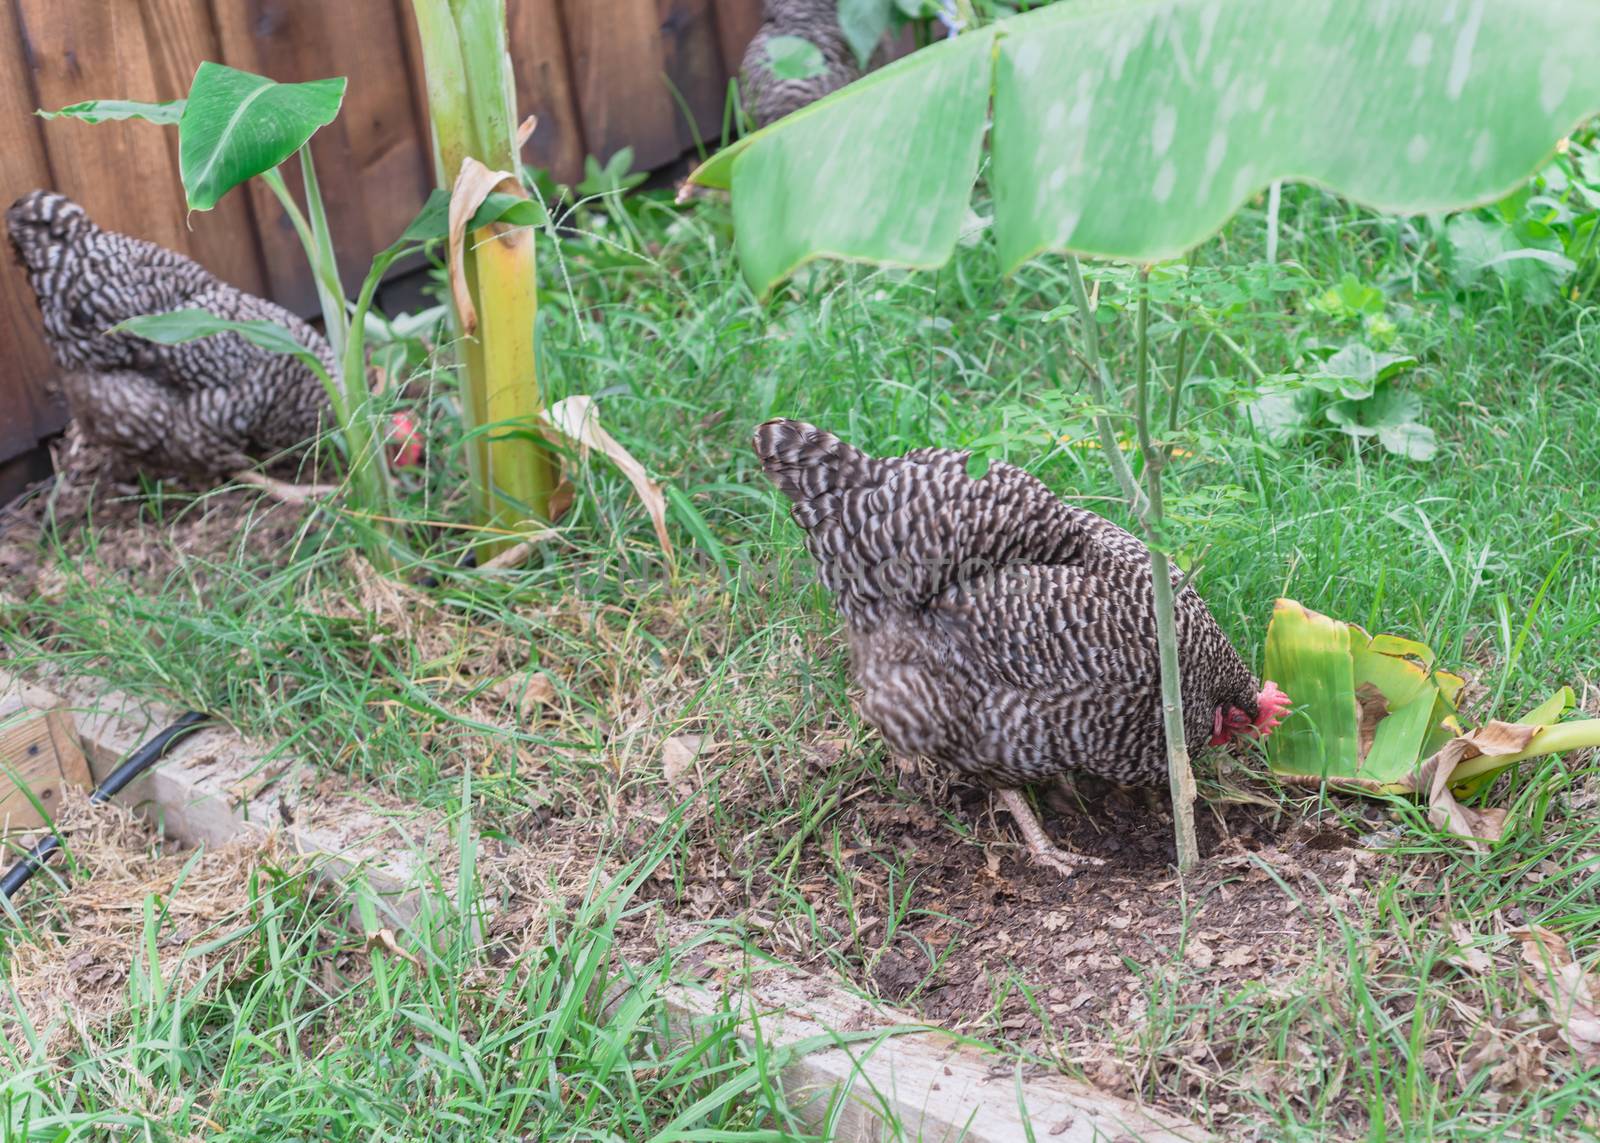 Two free range chickens at backyard garden near Dallas, Texas, America. Marans breed barred feathering laying hen chick pecking in natural settings at vegetable allotment